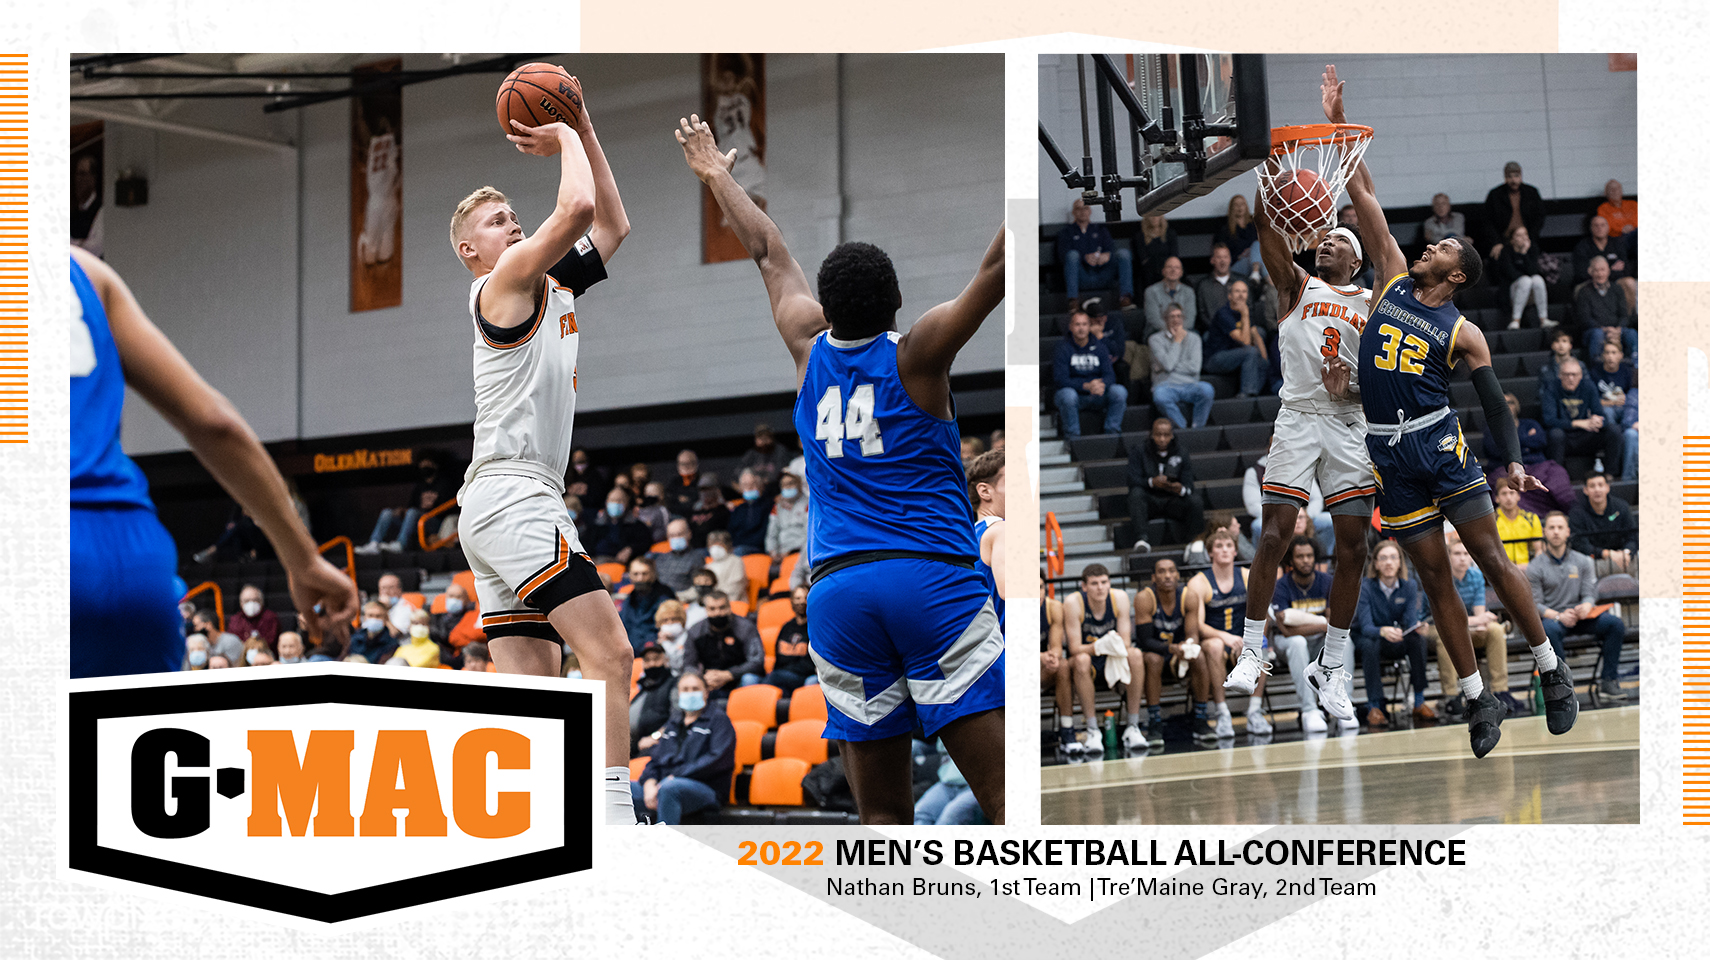 2022 men's basketball all-conference team